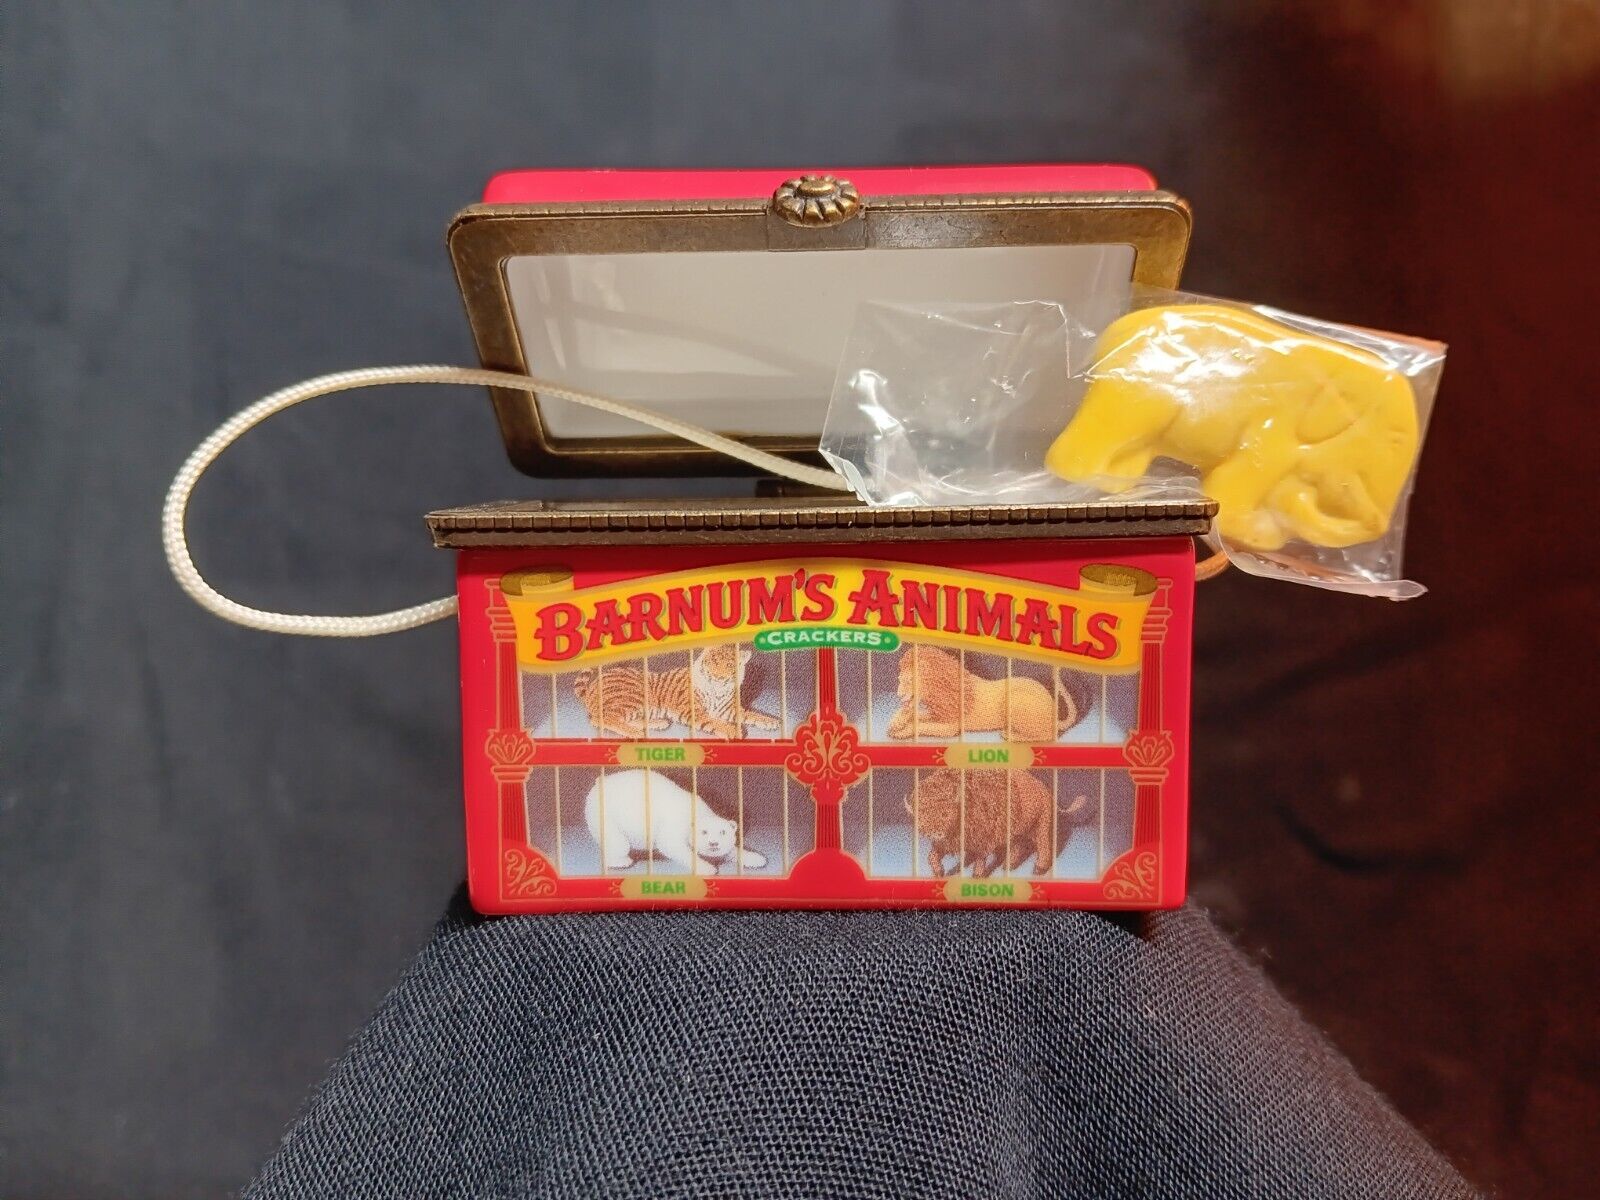 Barnum's Animal Crackers Midwest of Cannon Falls Porcelain Hinged Box